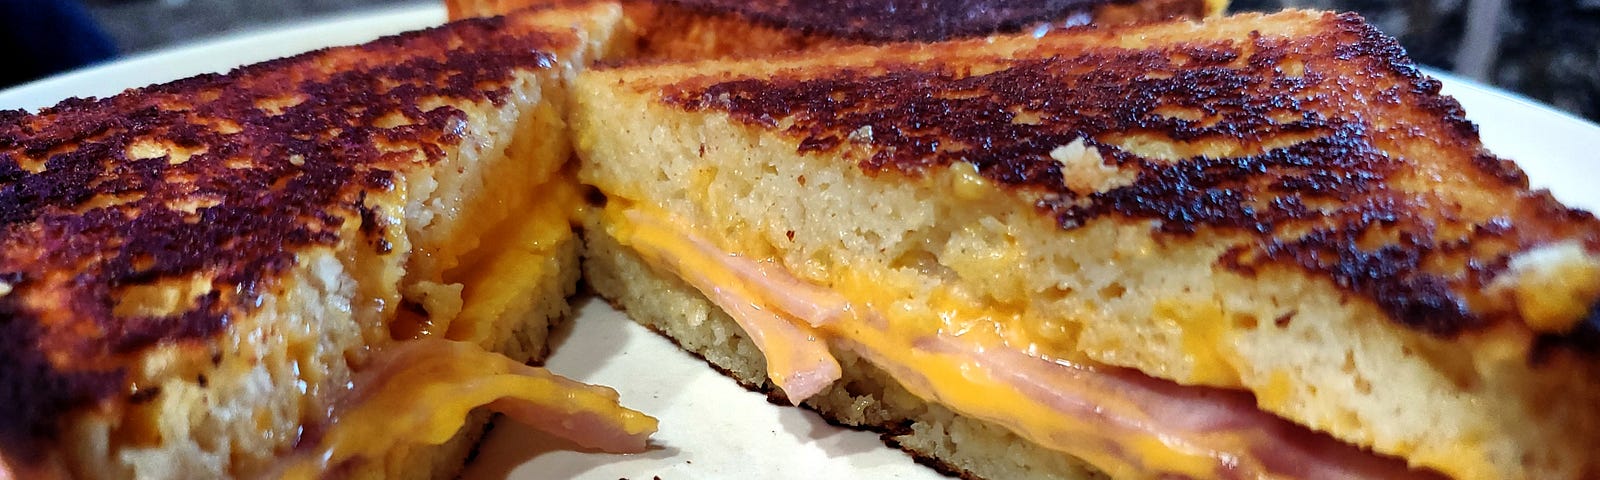 A toasted sandwich with melted cheese and ham is cut diagonally and placed on a white plate. It’s grilled to a golden-brown color and appears crispy on the exterior, with the cheese oozing out from the middle.